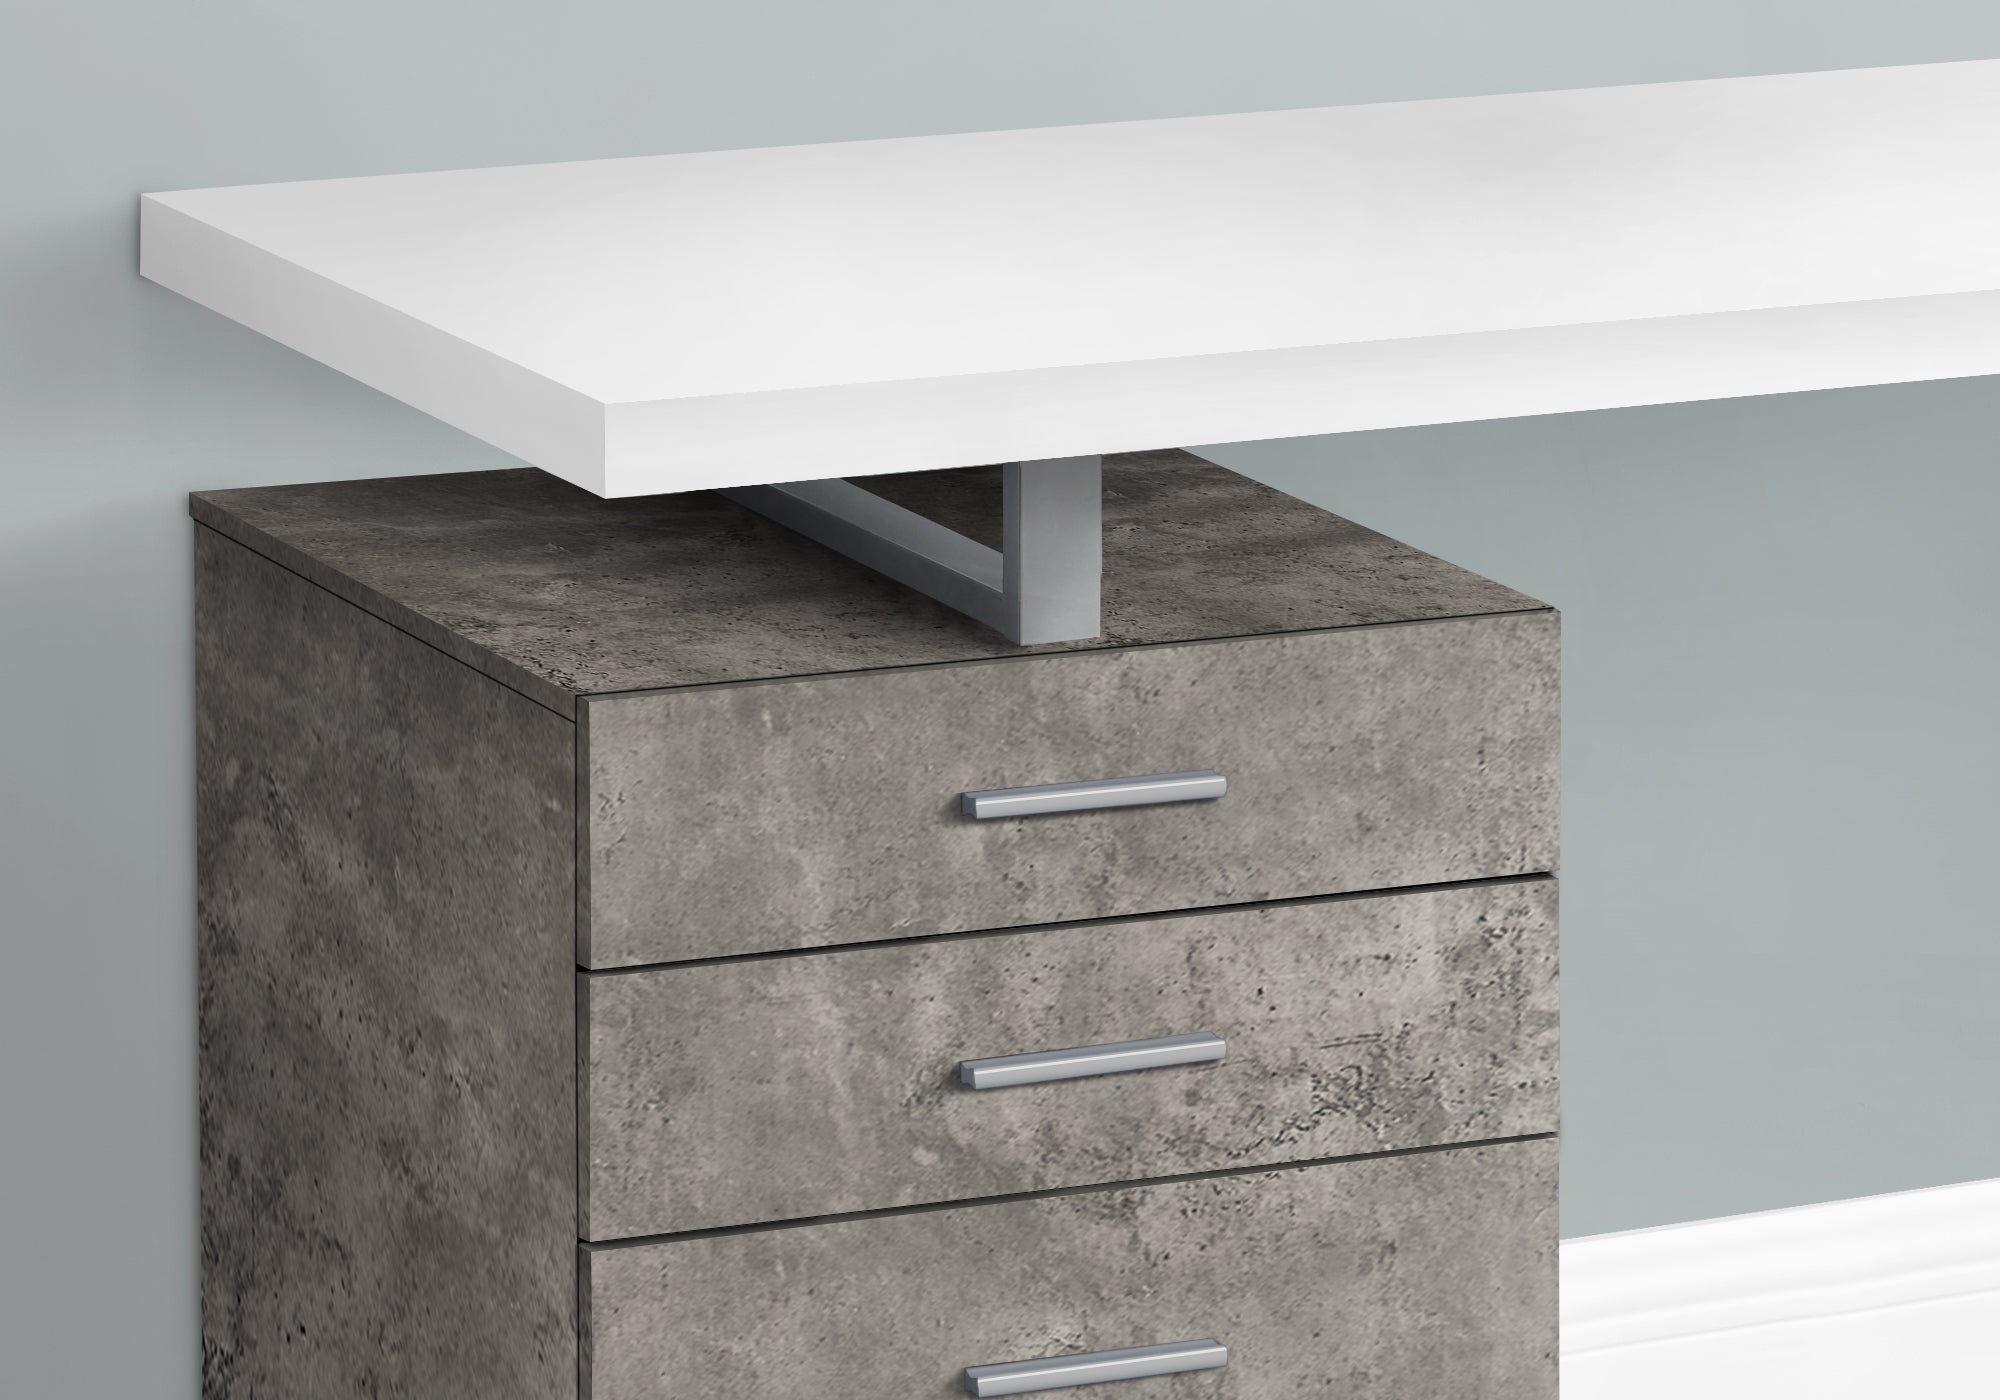 MN-547648    Computer Desk, Home Office, Laptop, Left, Right Set-Up, Storage Drawers, 48"L, Metal, Laminate, Grey Concrete, Silver, Contemporary, Modern